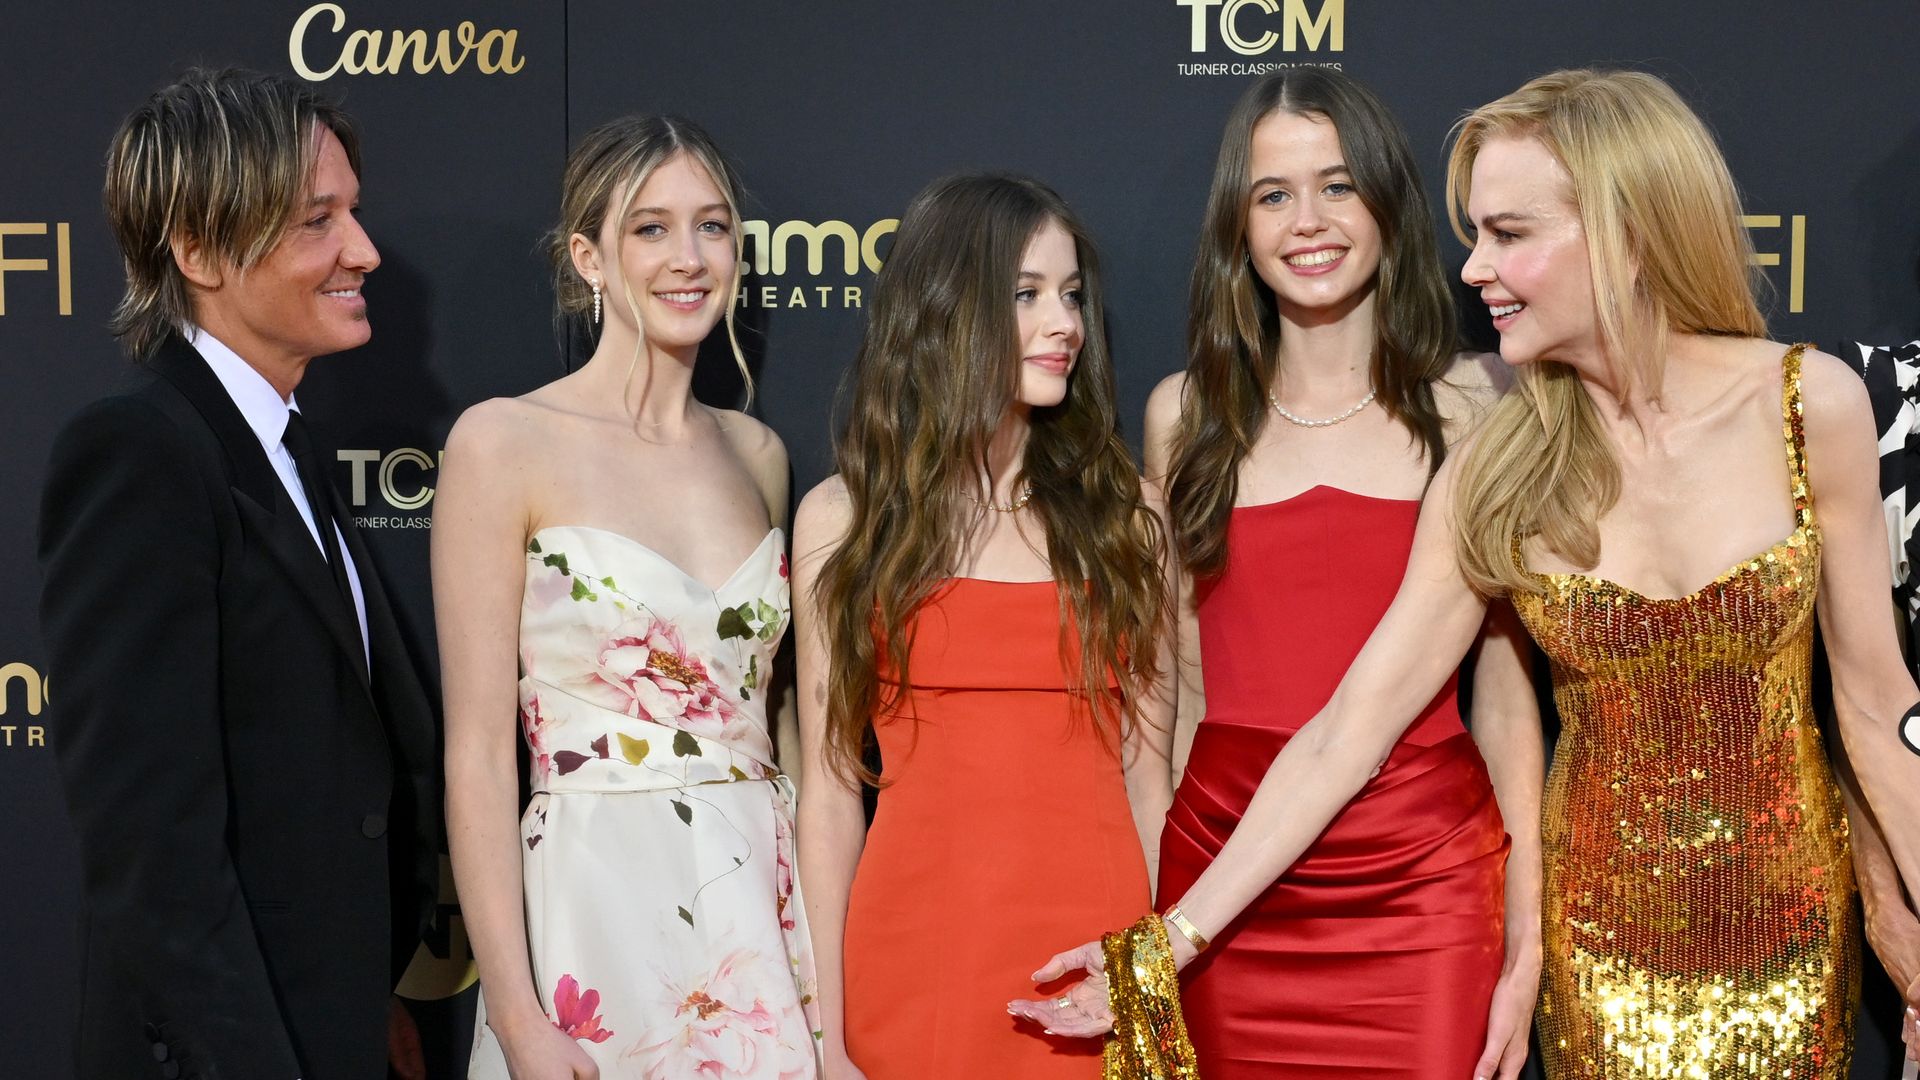 Nicole Kidman's house party with teenage daughters that shows she's a super fun parent